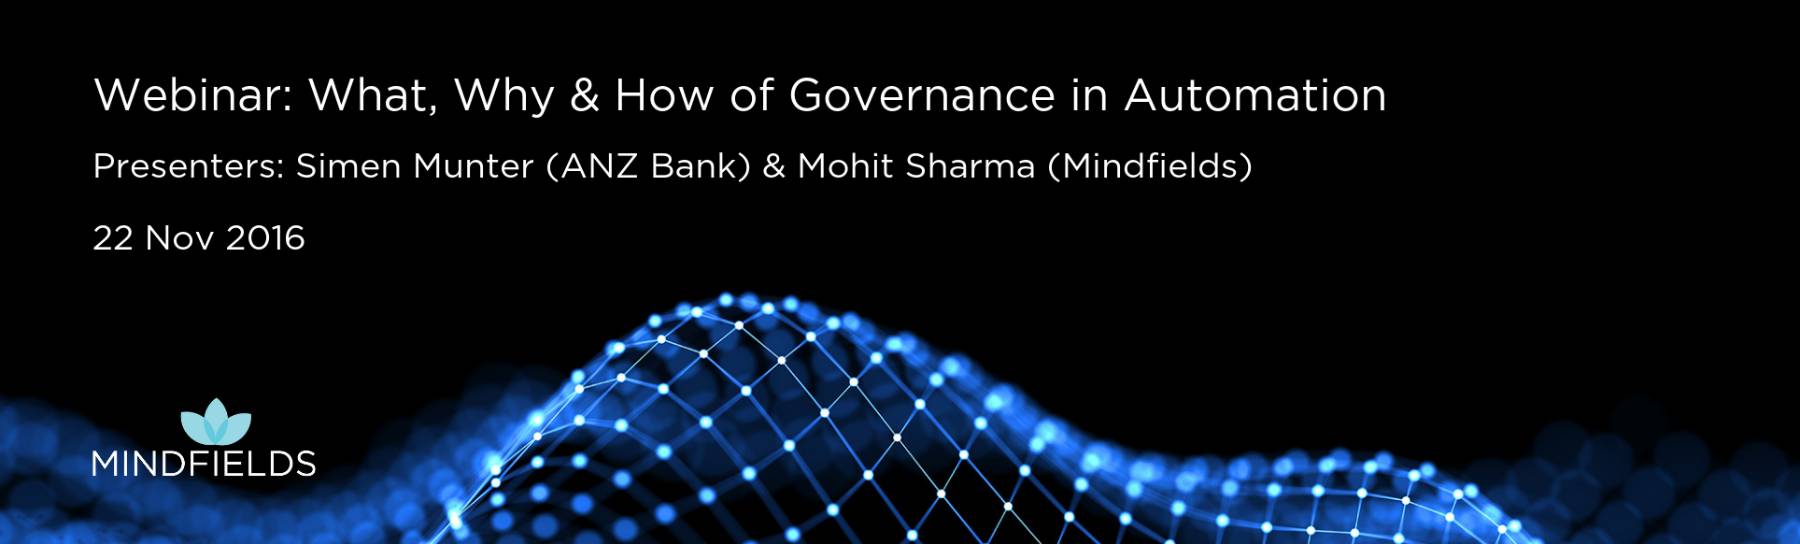 Governance in Robotic Process Automation